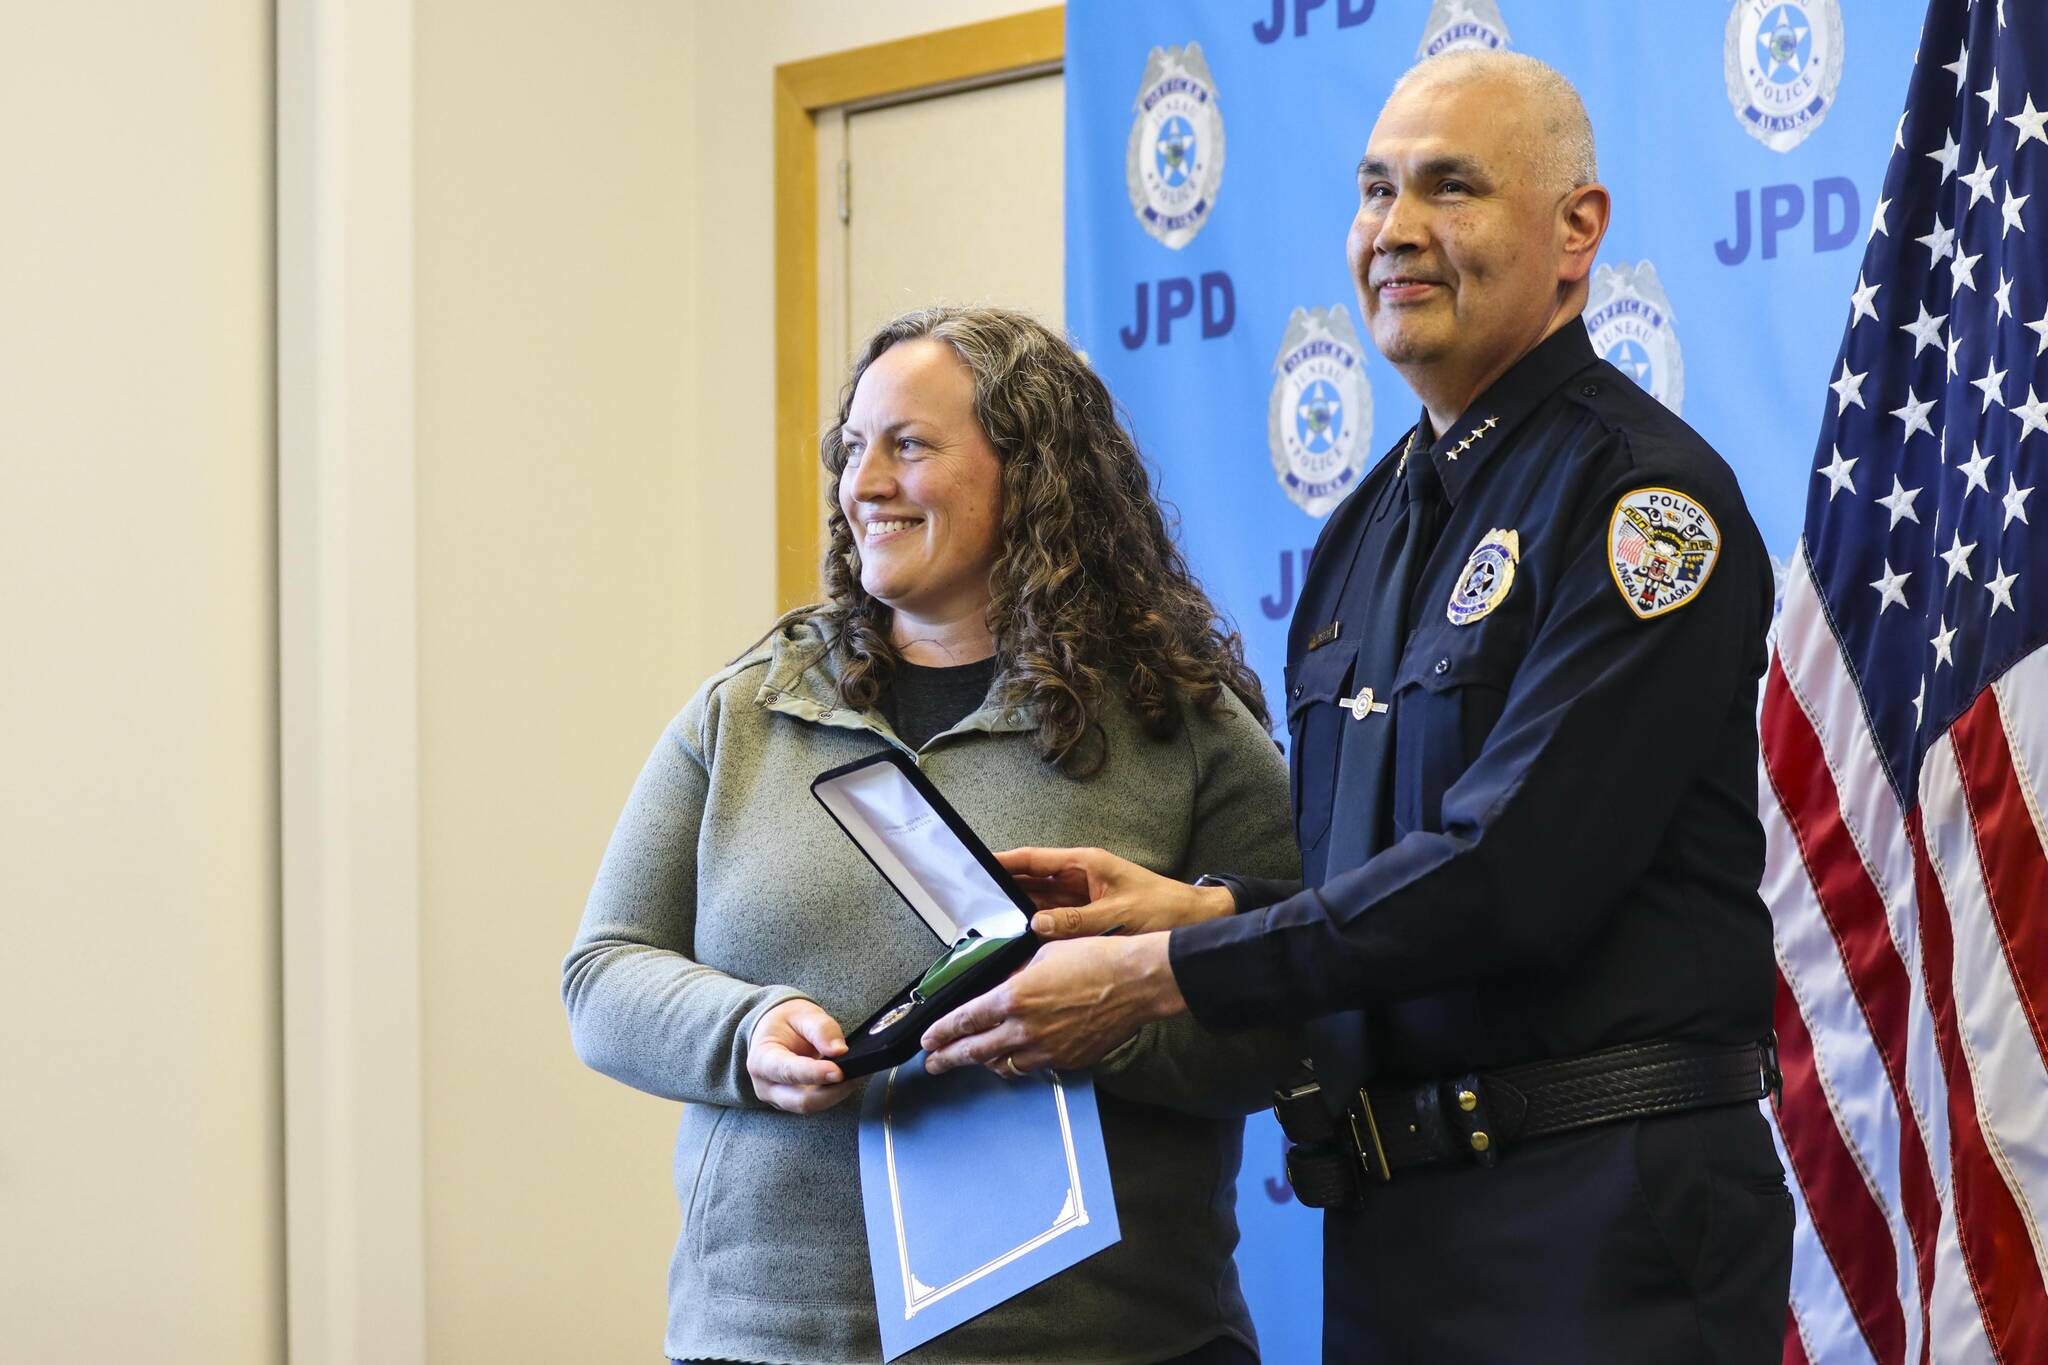 Chief Ed Mercer presents community service officer Sarah Dolan with the Jackie Renninger Community Policing Award during the Juneau Police Department’s annual award ceremony on June 9, 2022. (Michael S. Lockett / Juneau Empire)